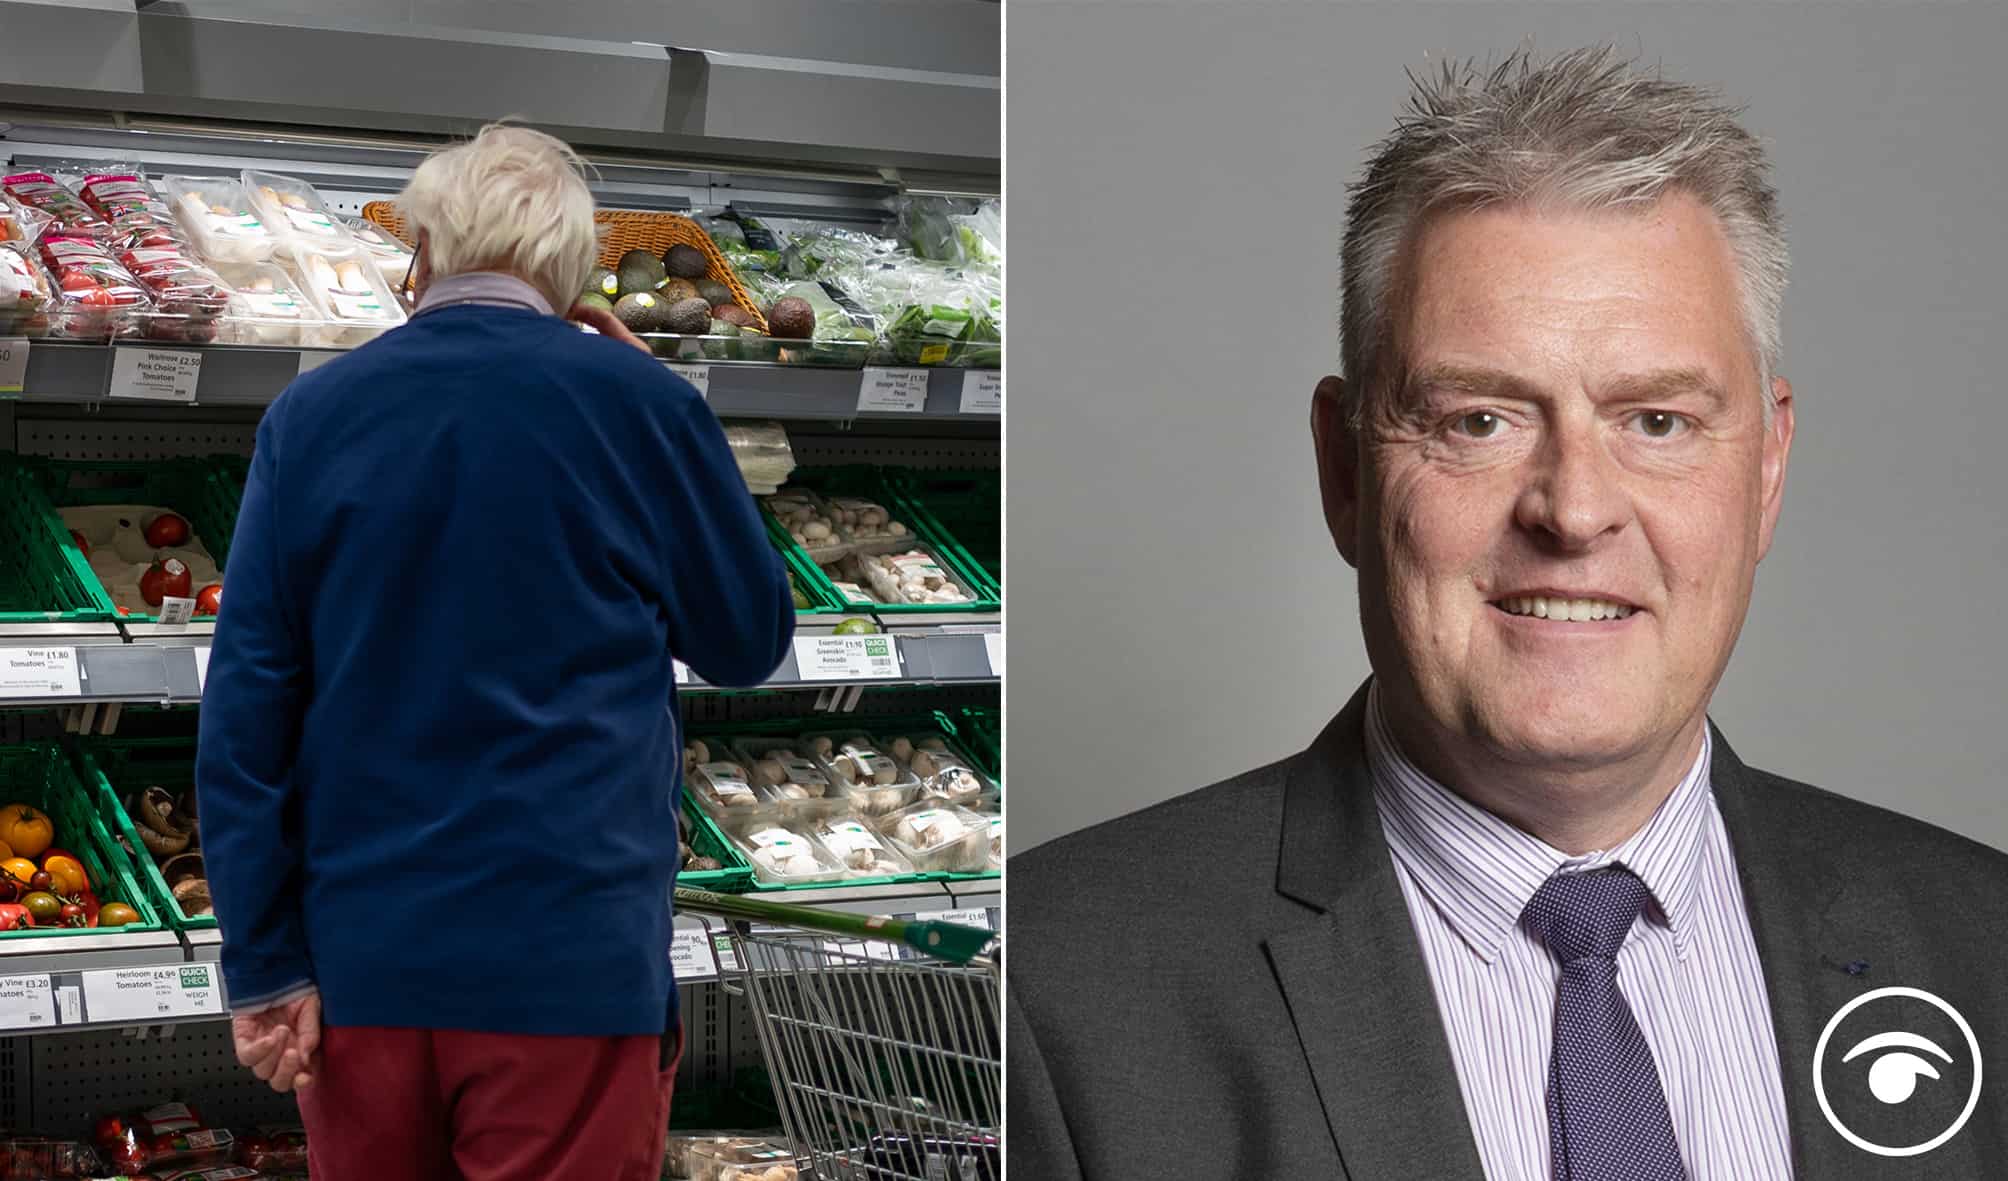 Reader’s letter to newspaper nails ’30p a meal’ Tory MP argument